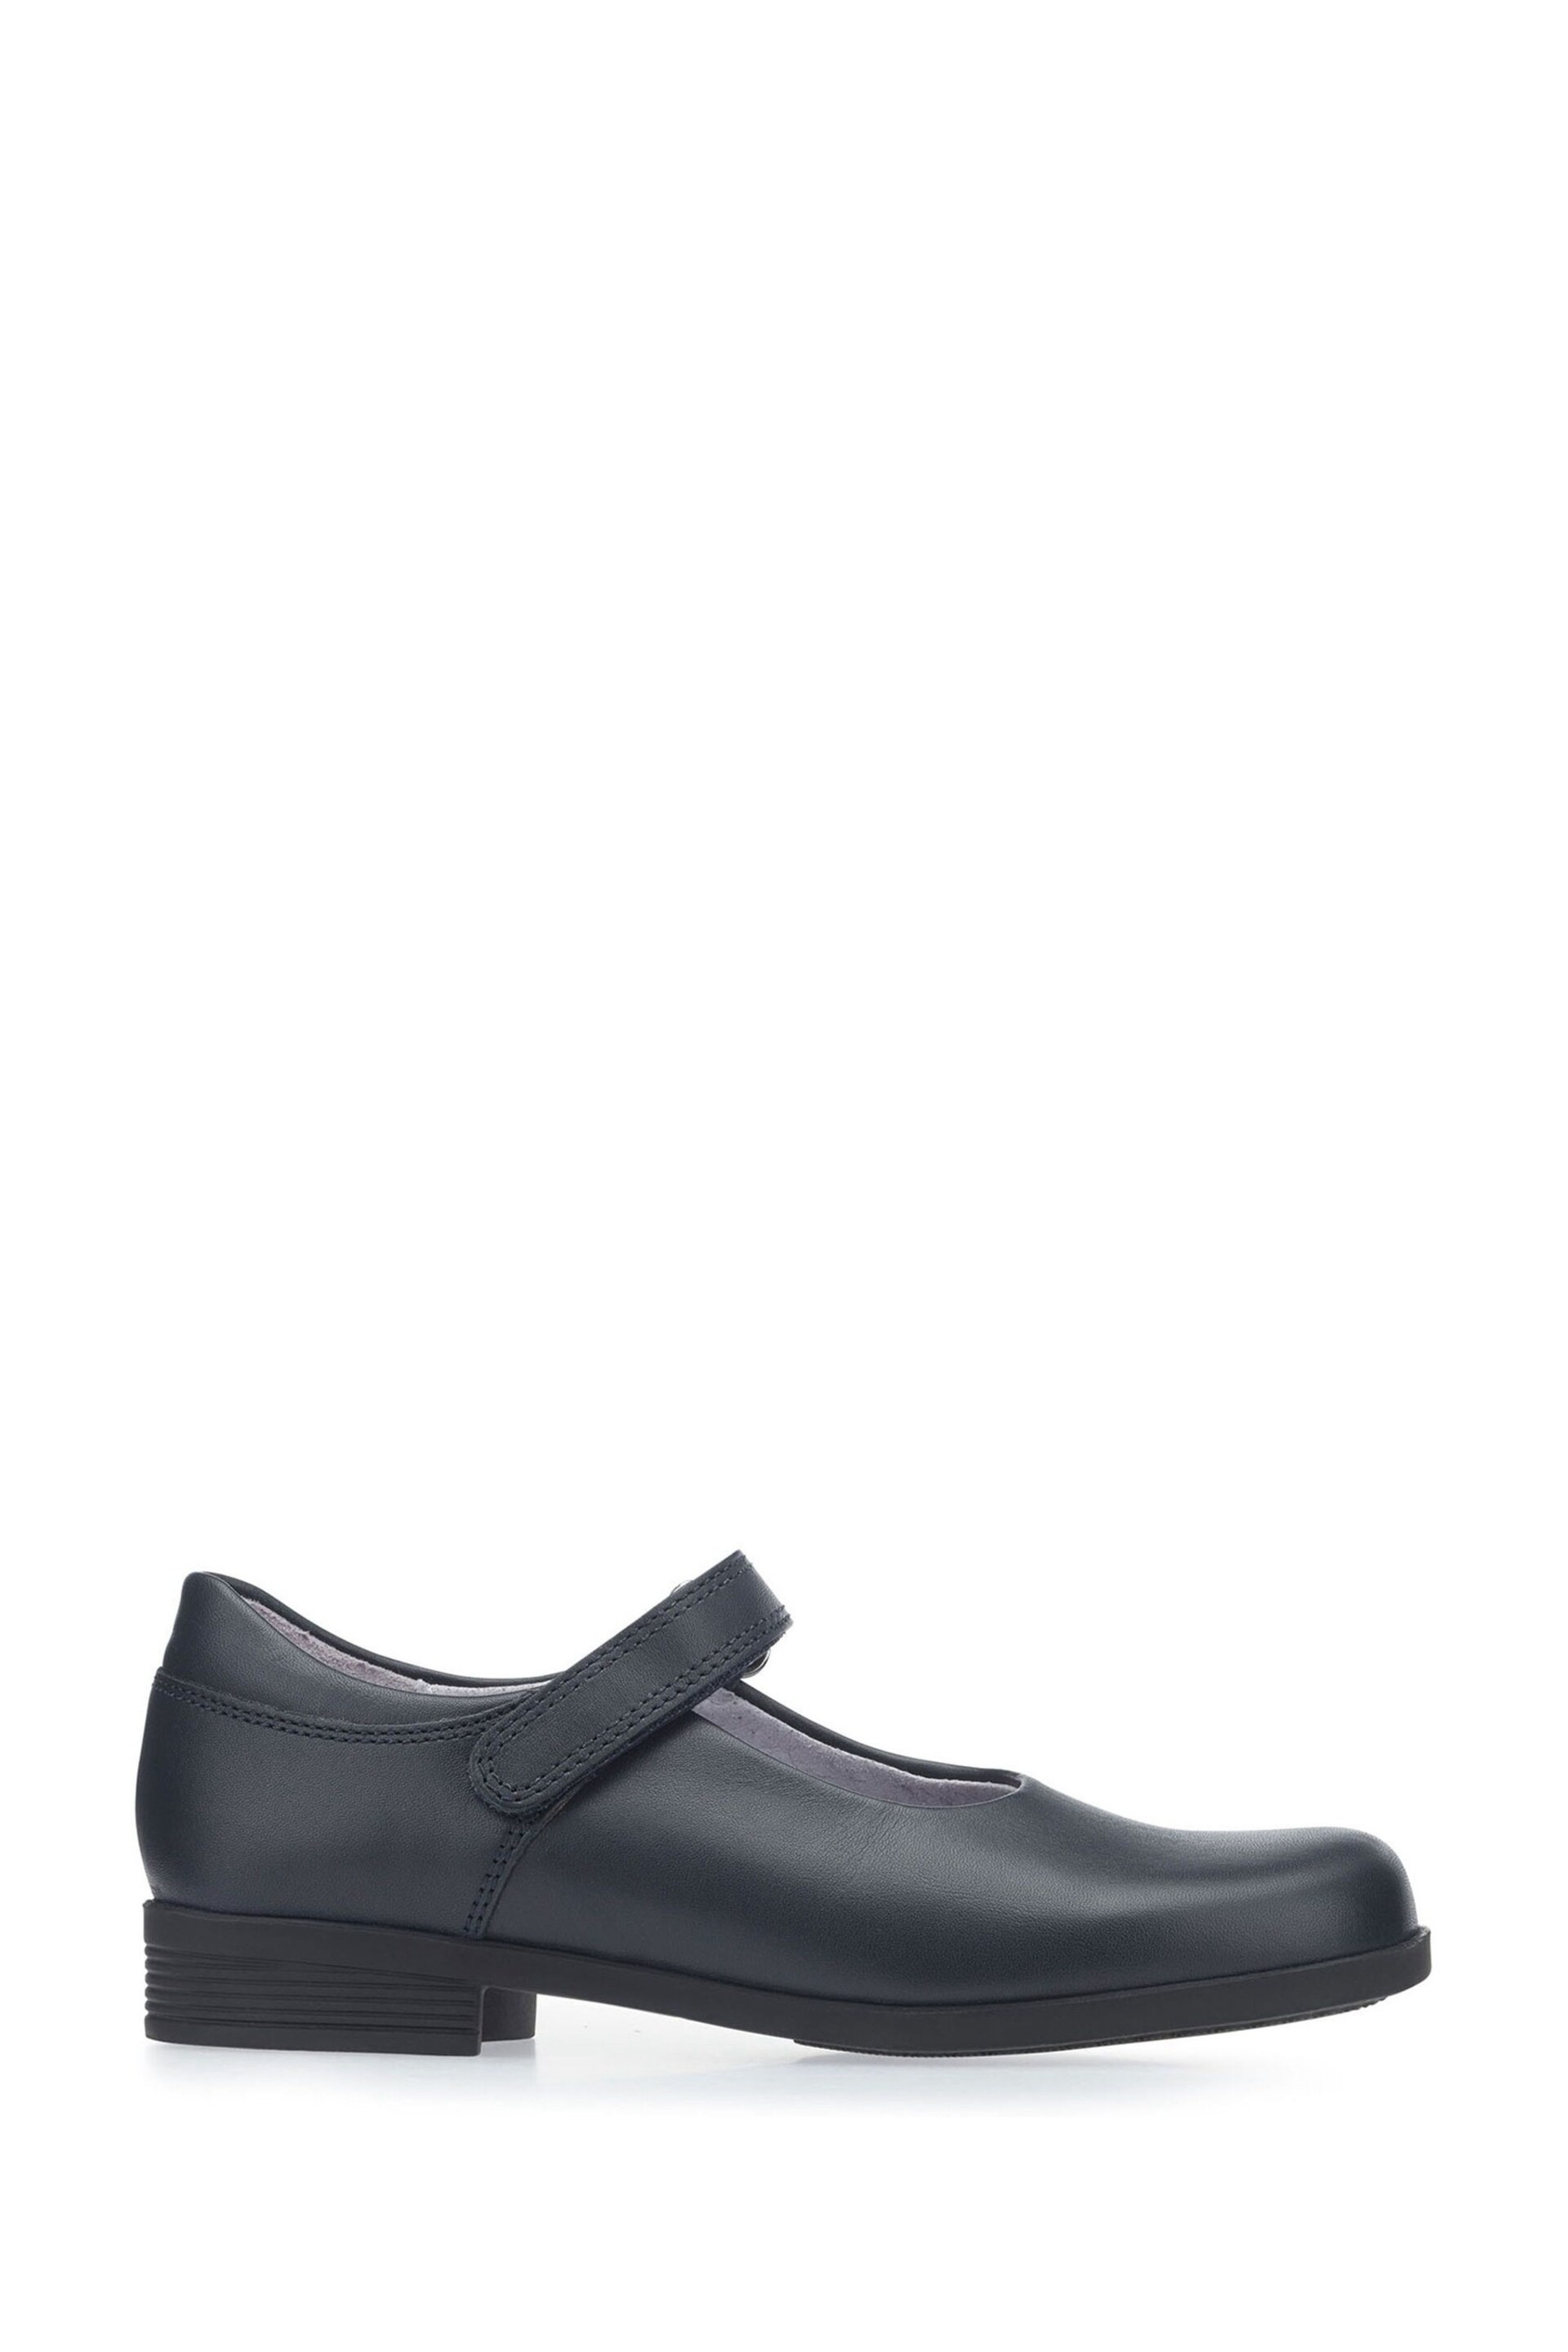 Start-Rite Samba Navy Blue Leather School Shoes F Fit - Image 1 of 7